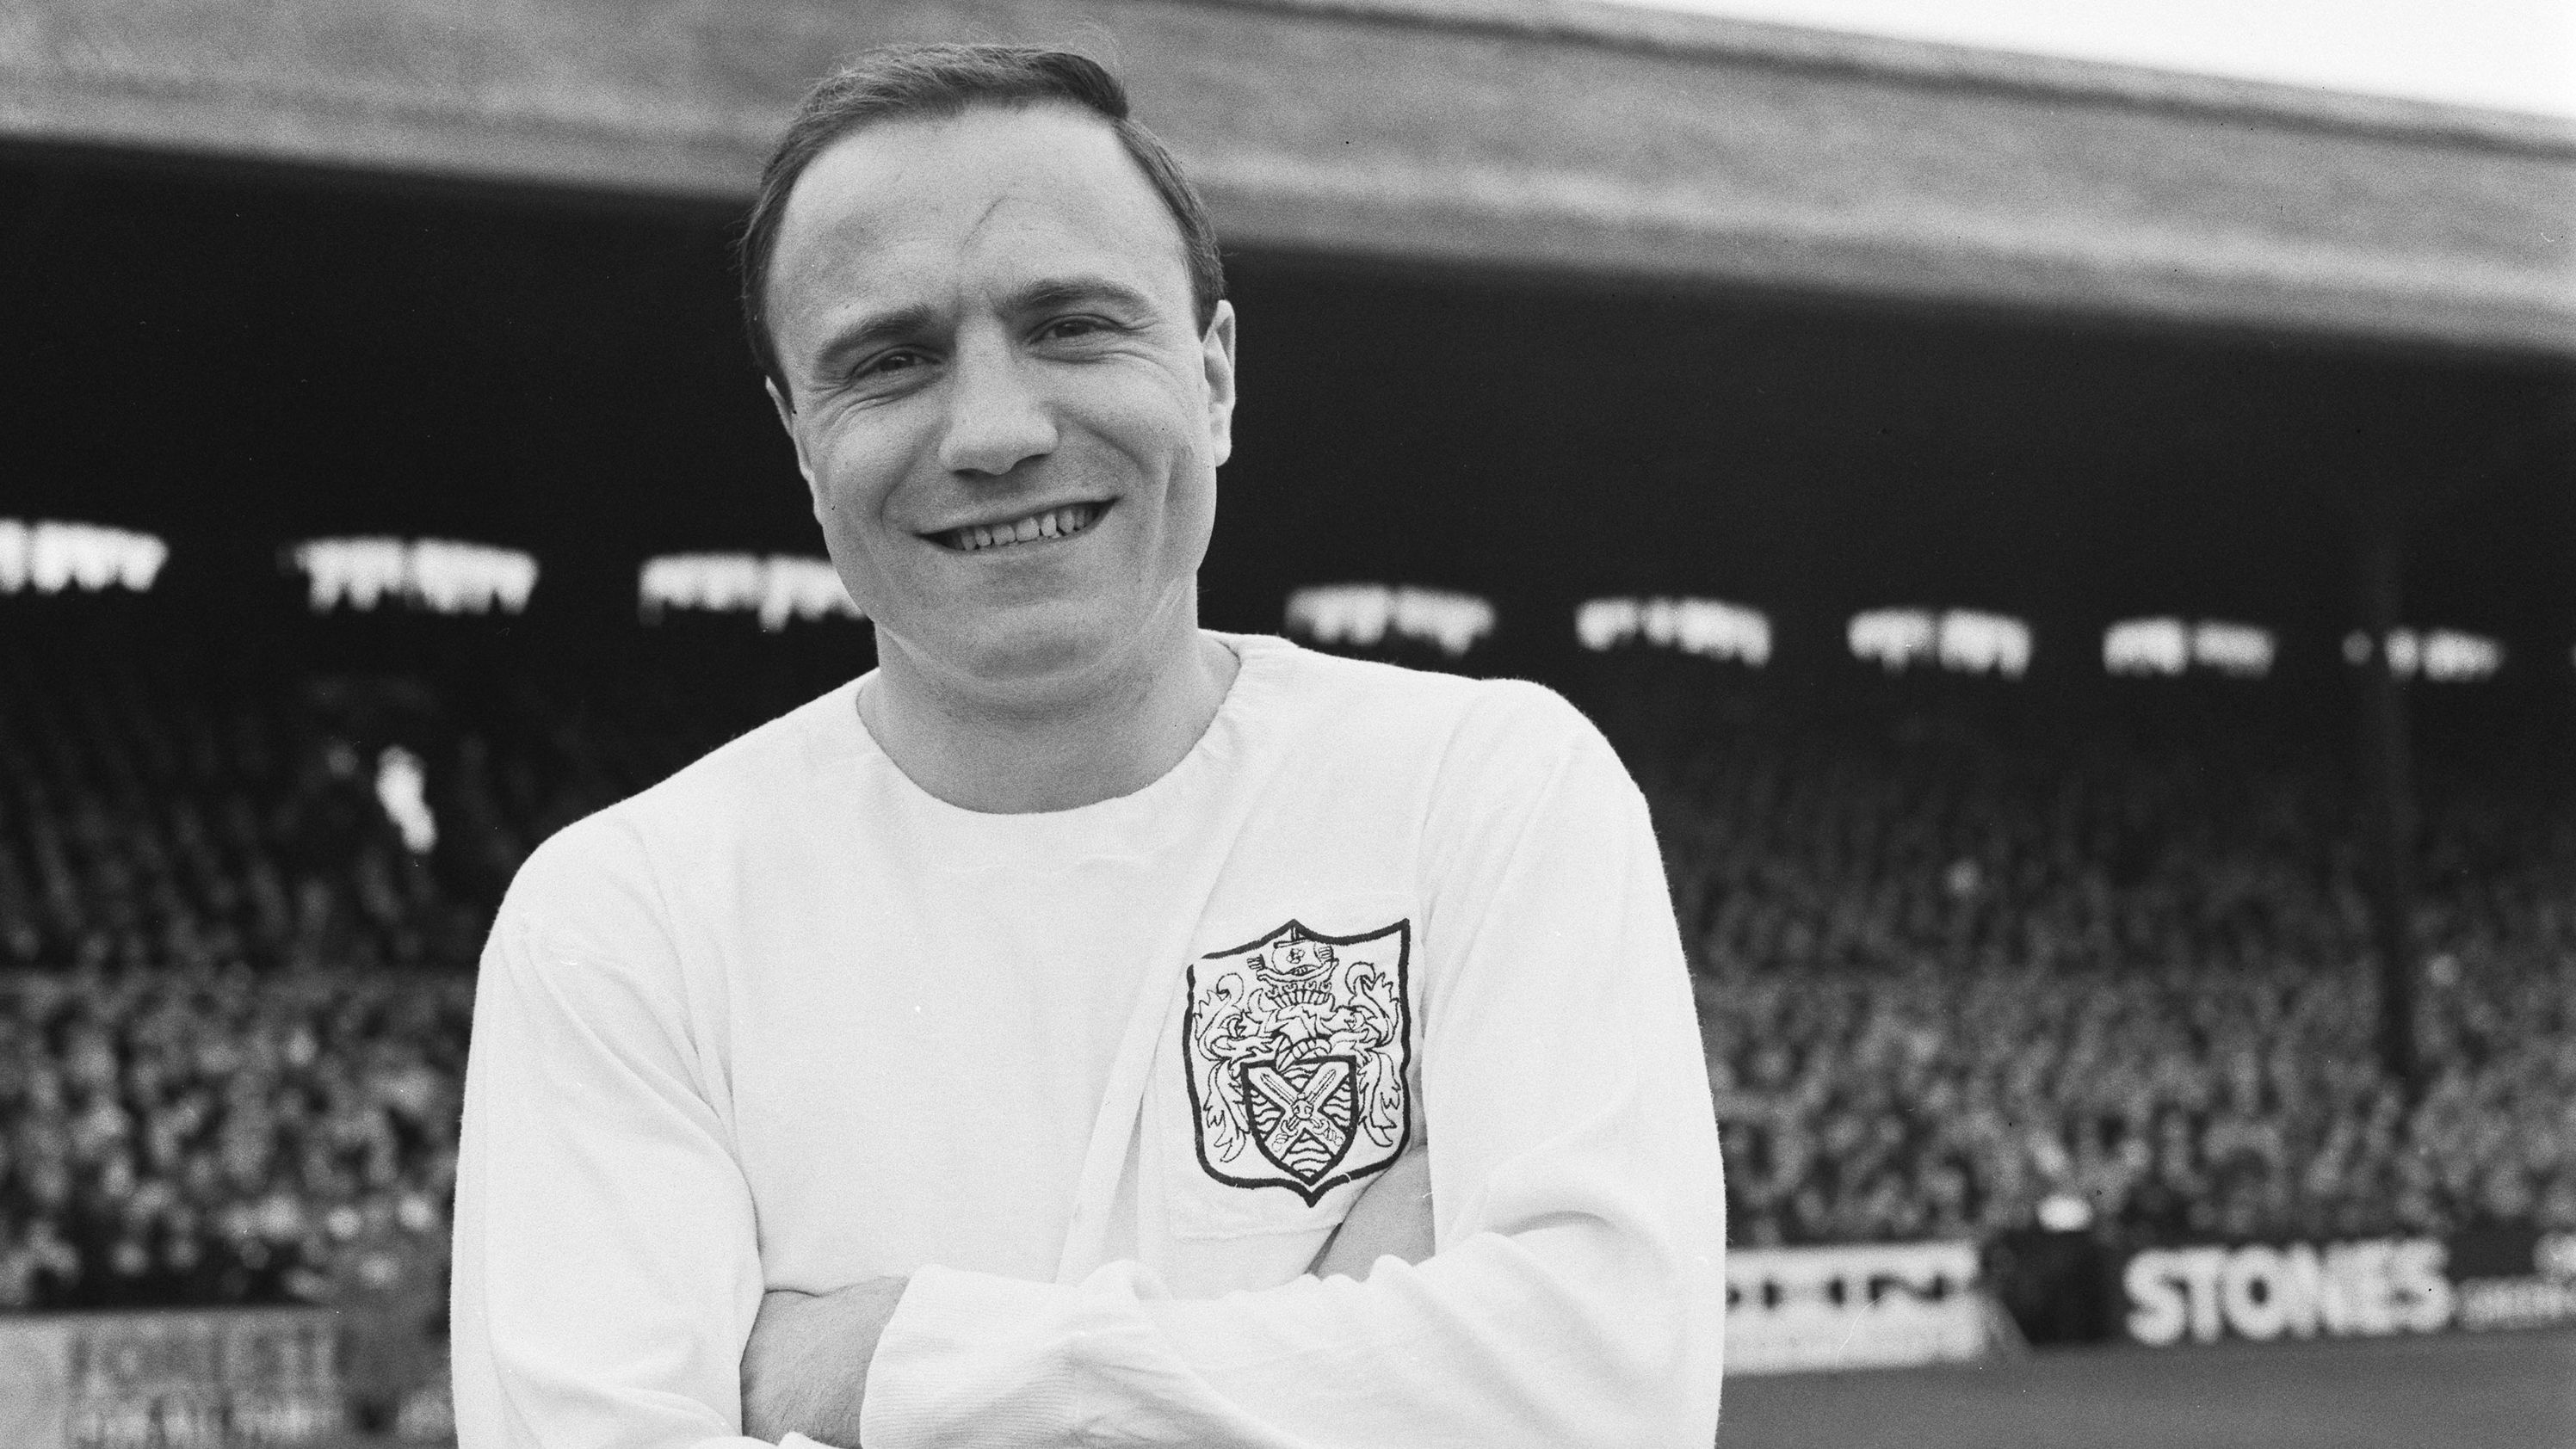 Footballer <a href="https://www.cnn.com/2022/12/23/football/george-cohen-world-cup-winner-dies-spt-intl/index.html" target="_blank">George Cohen</a> died at age 83, his former club Fulham announced on December 23. Cohen was a member of the England team that won the 1966 World Cup. 